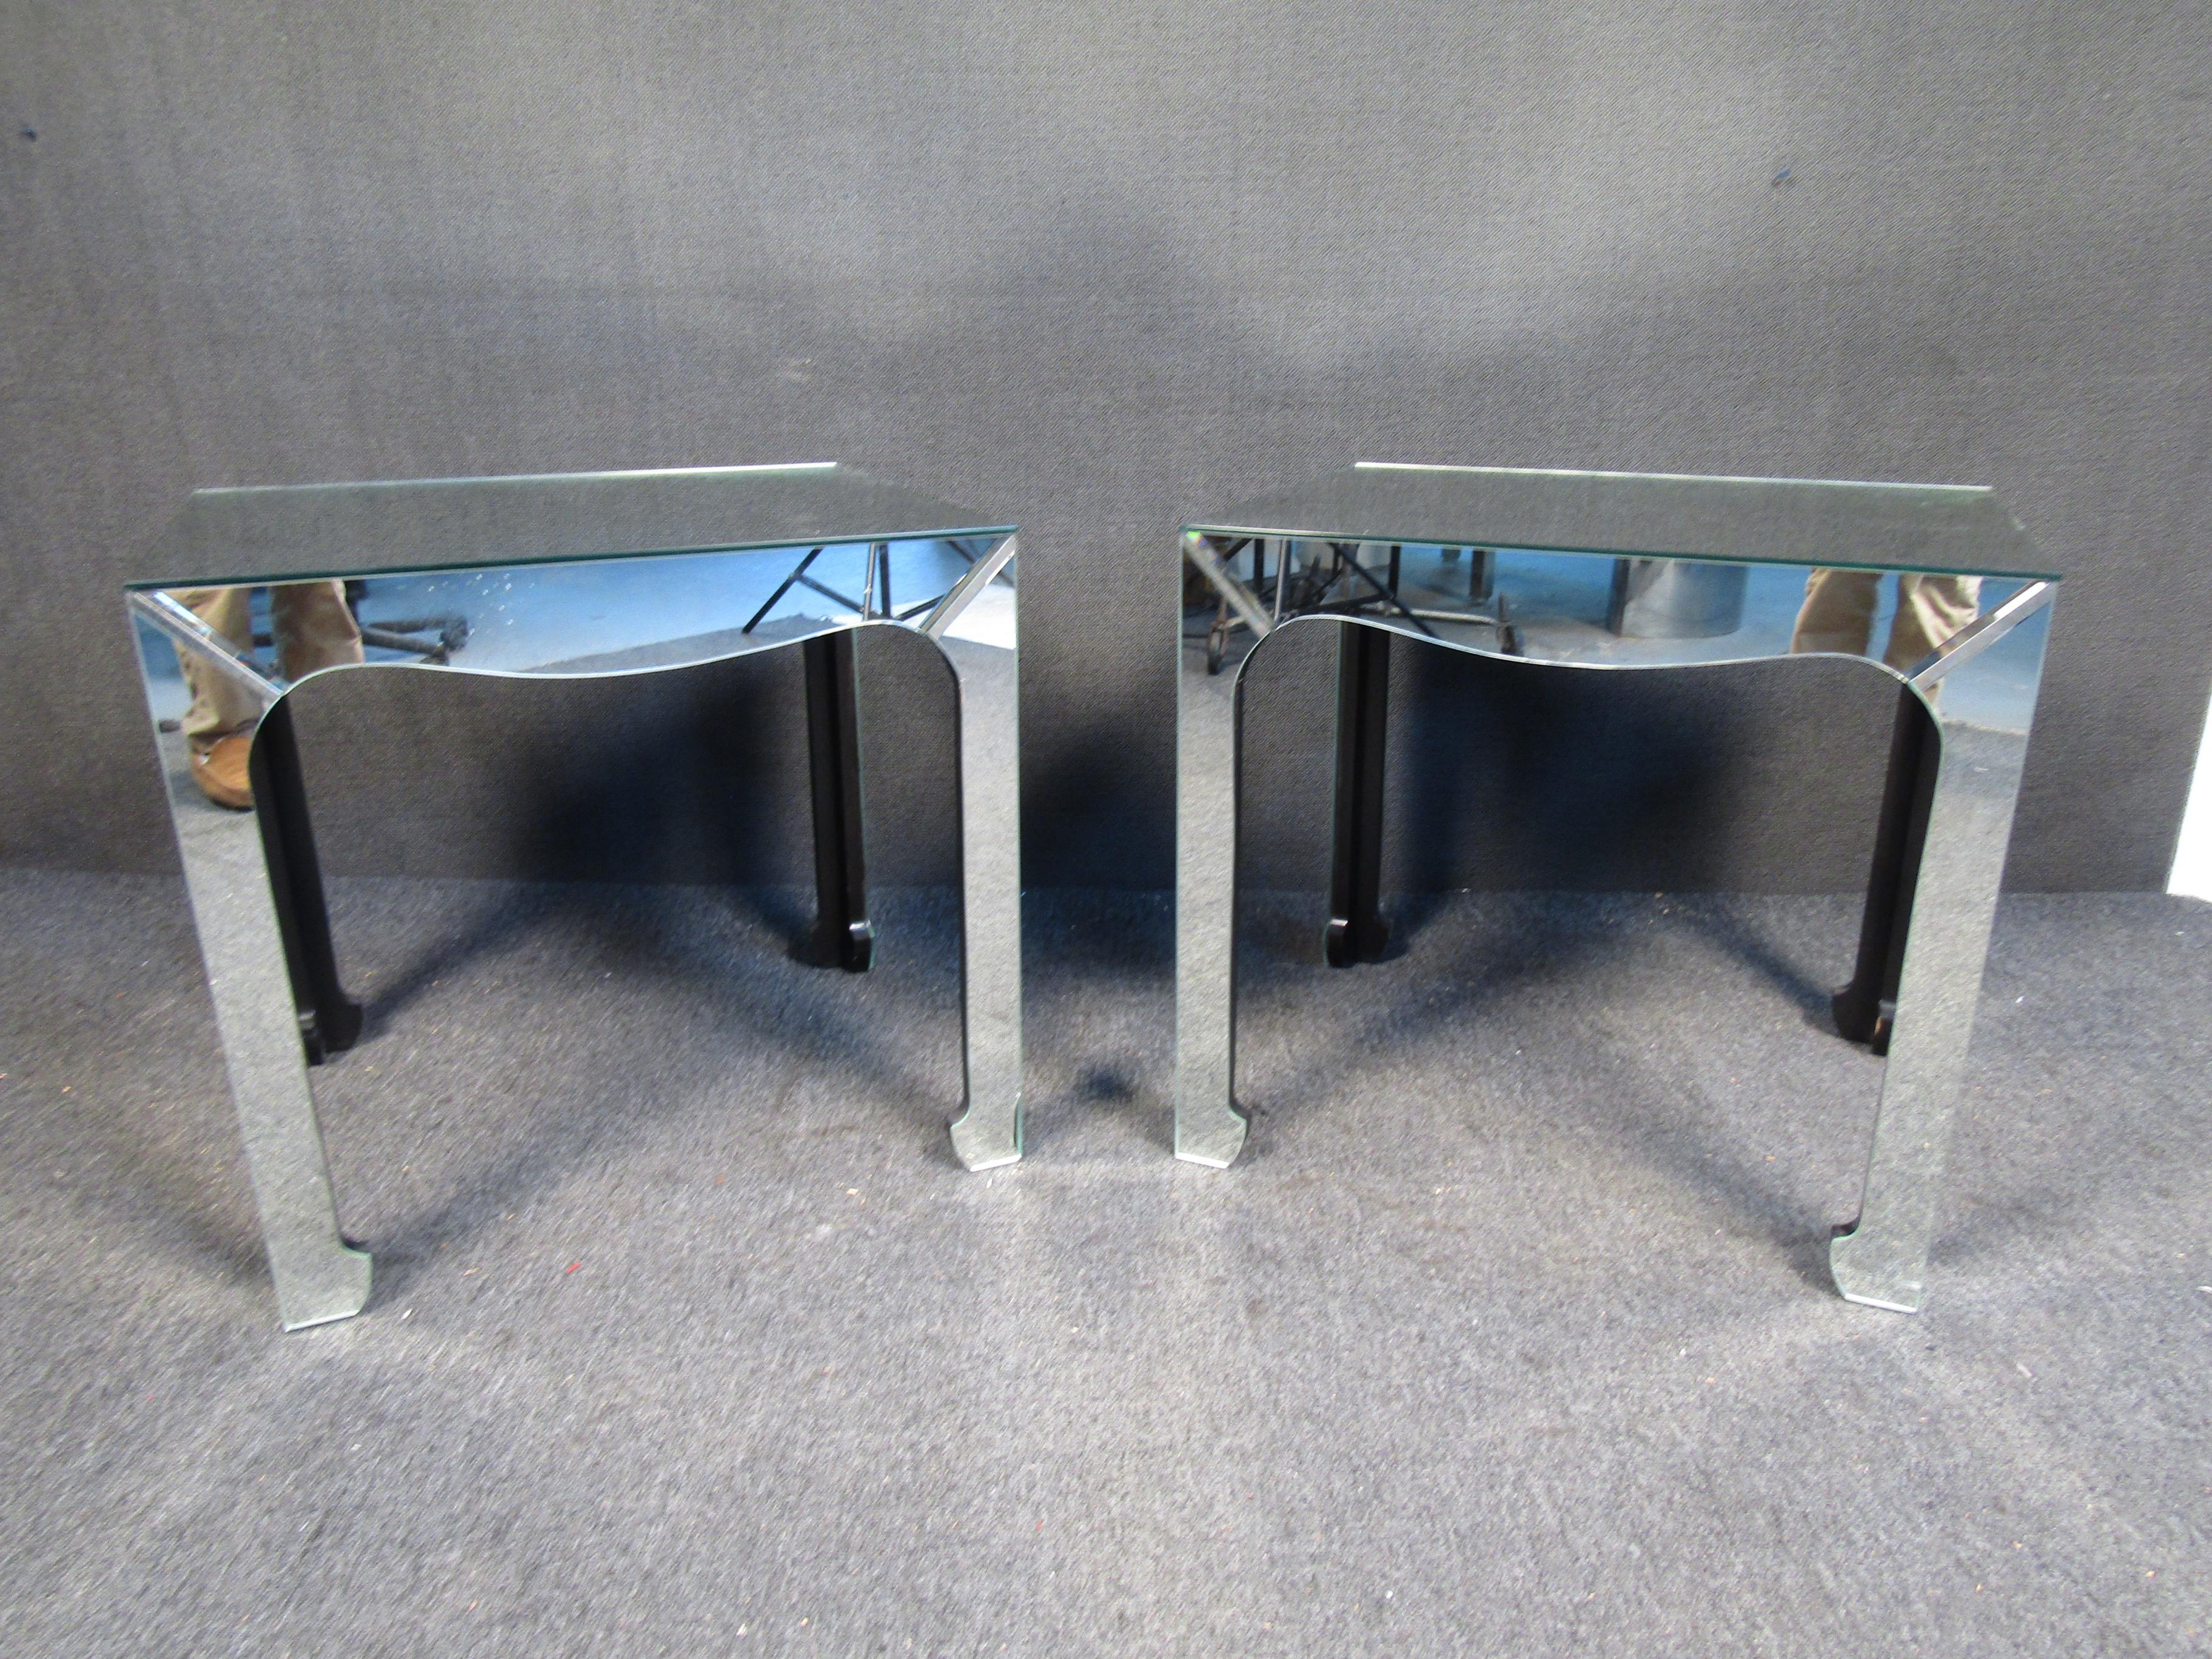 These eye-catching mirrored glass tables feature rectangular tops and oddly shaped legs. These side tables will surely pair to any bright or modern living space.

Please confirm item location (NJ or NY).